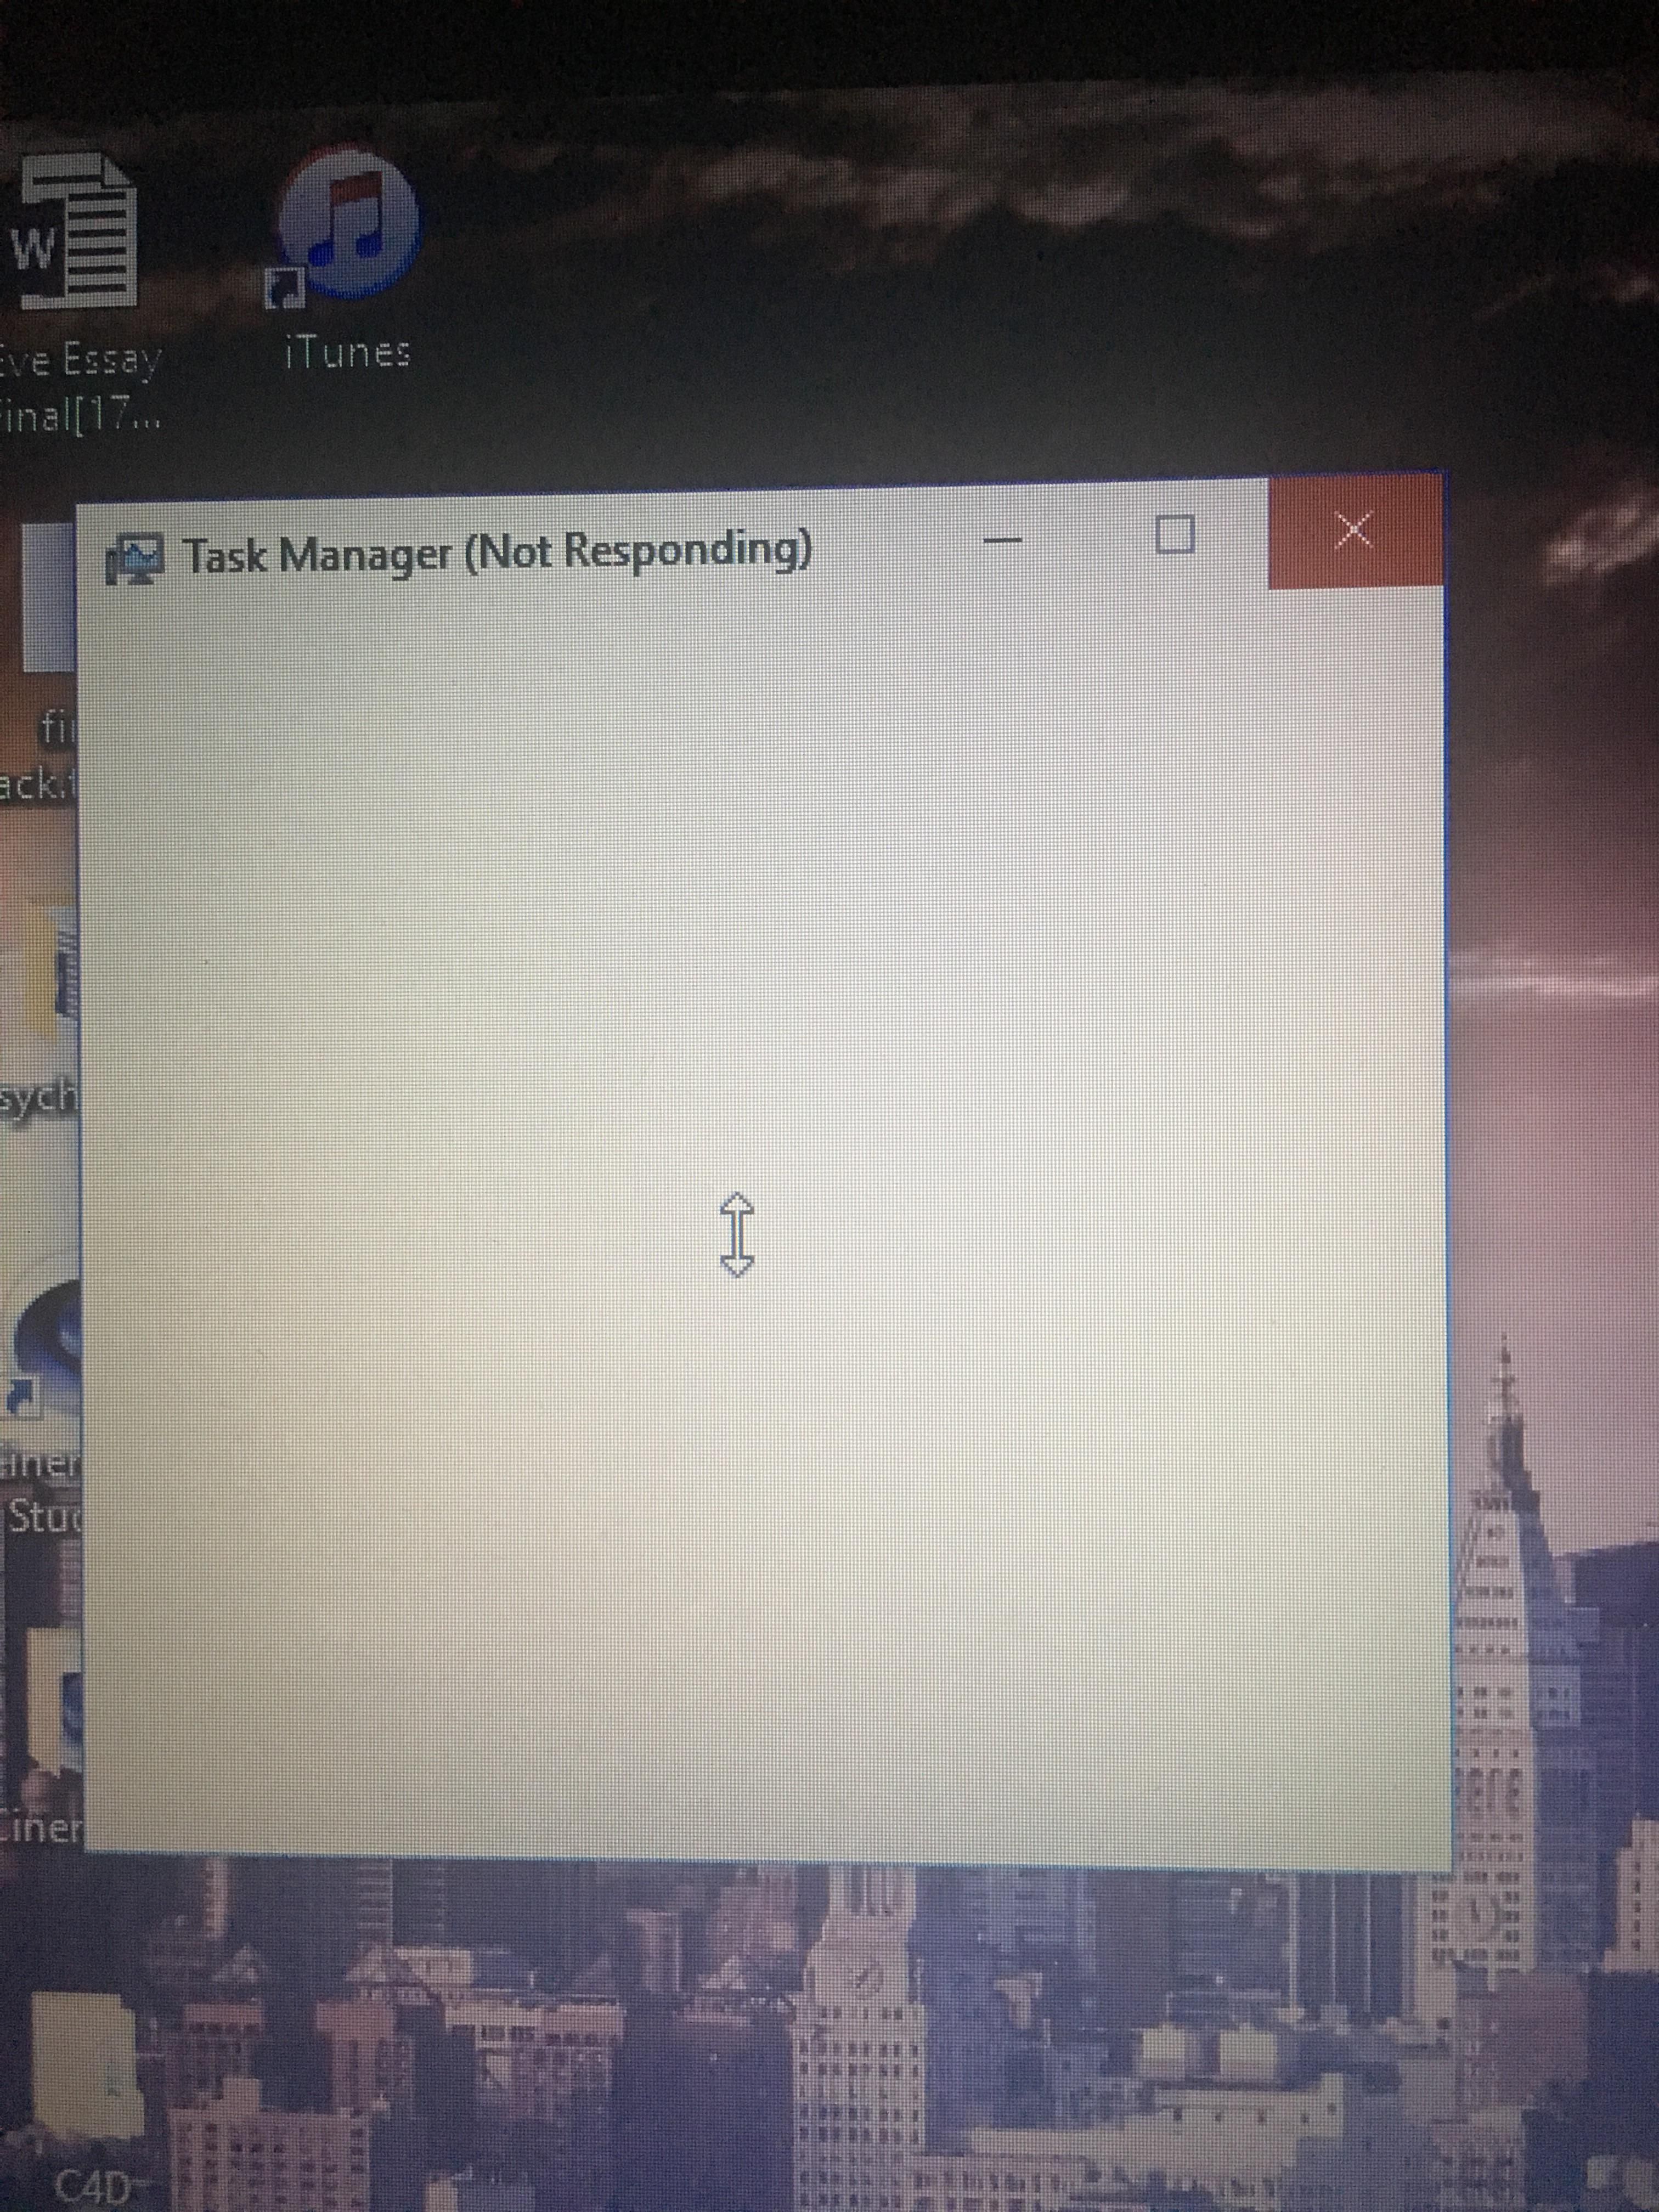 Task manager, you were my last line of defence and you have failed me